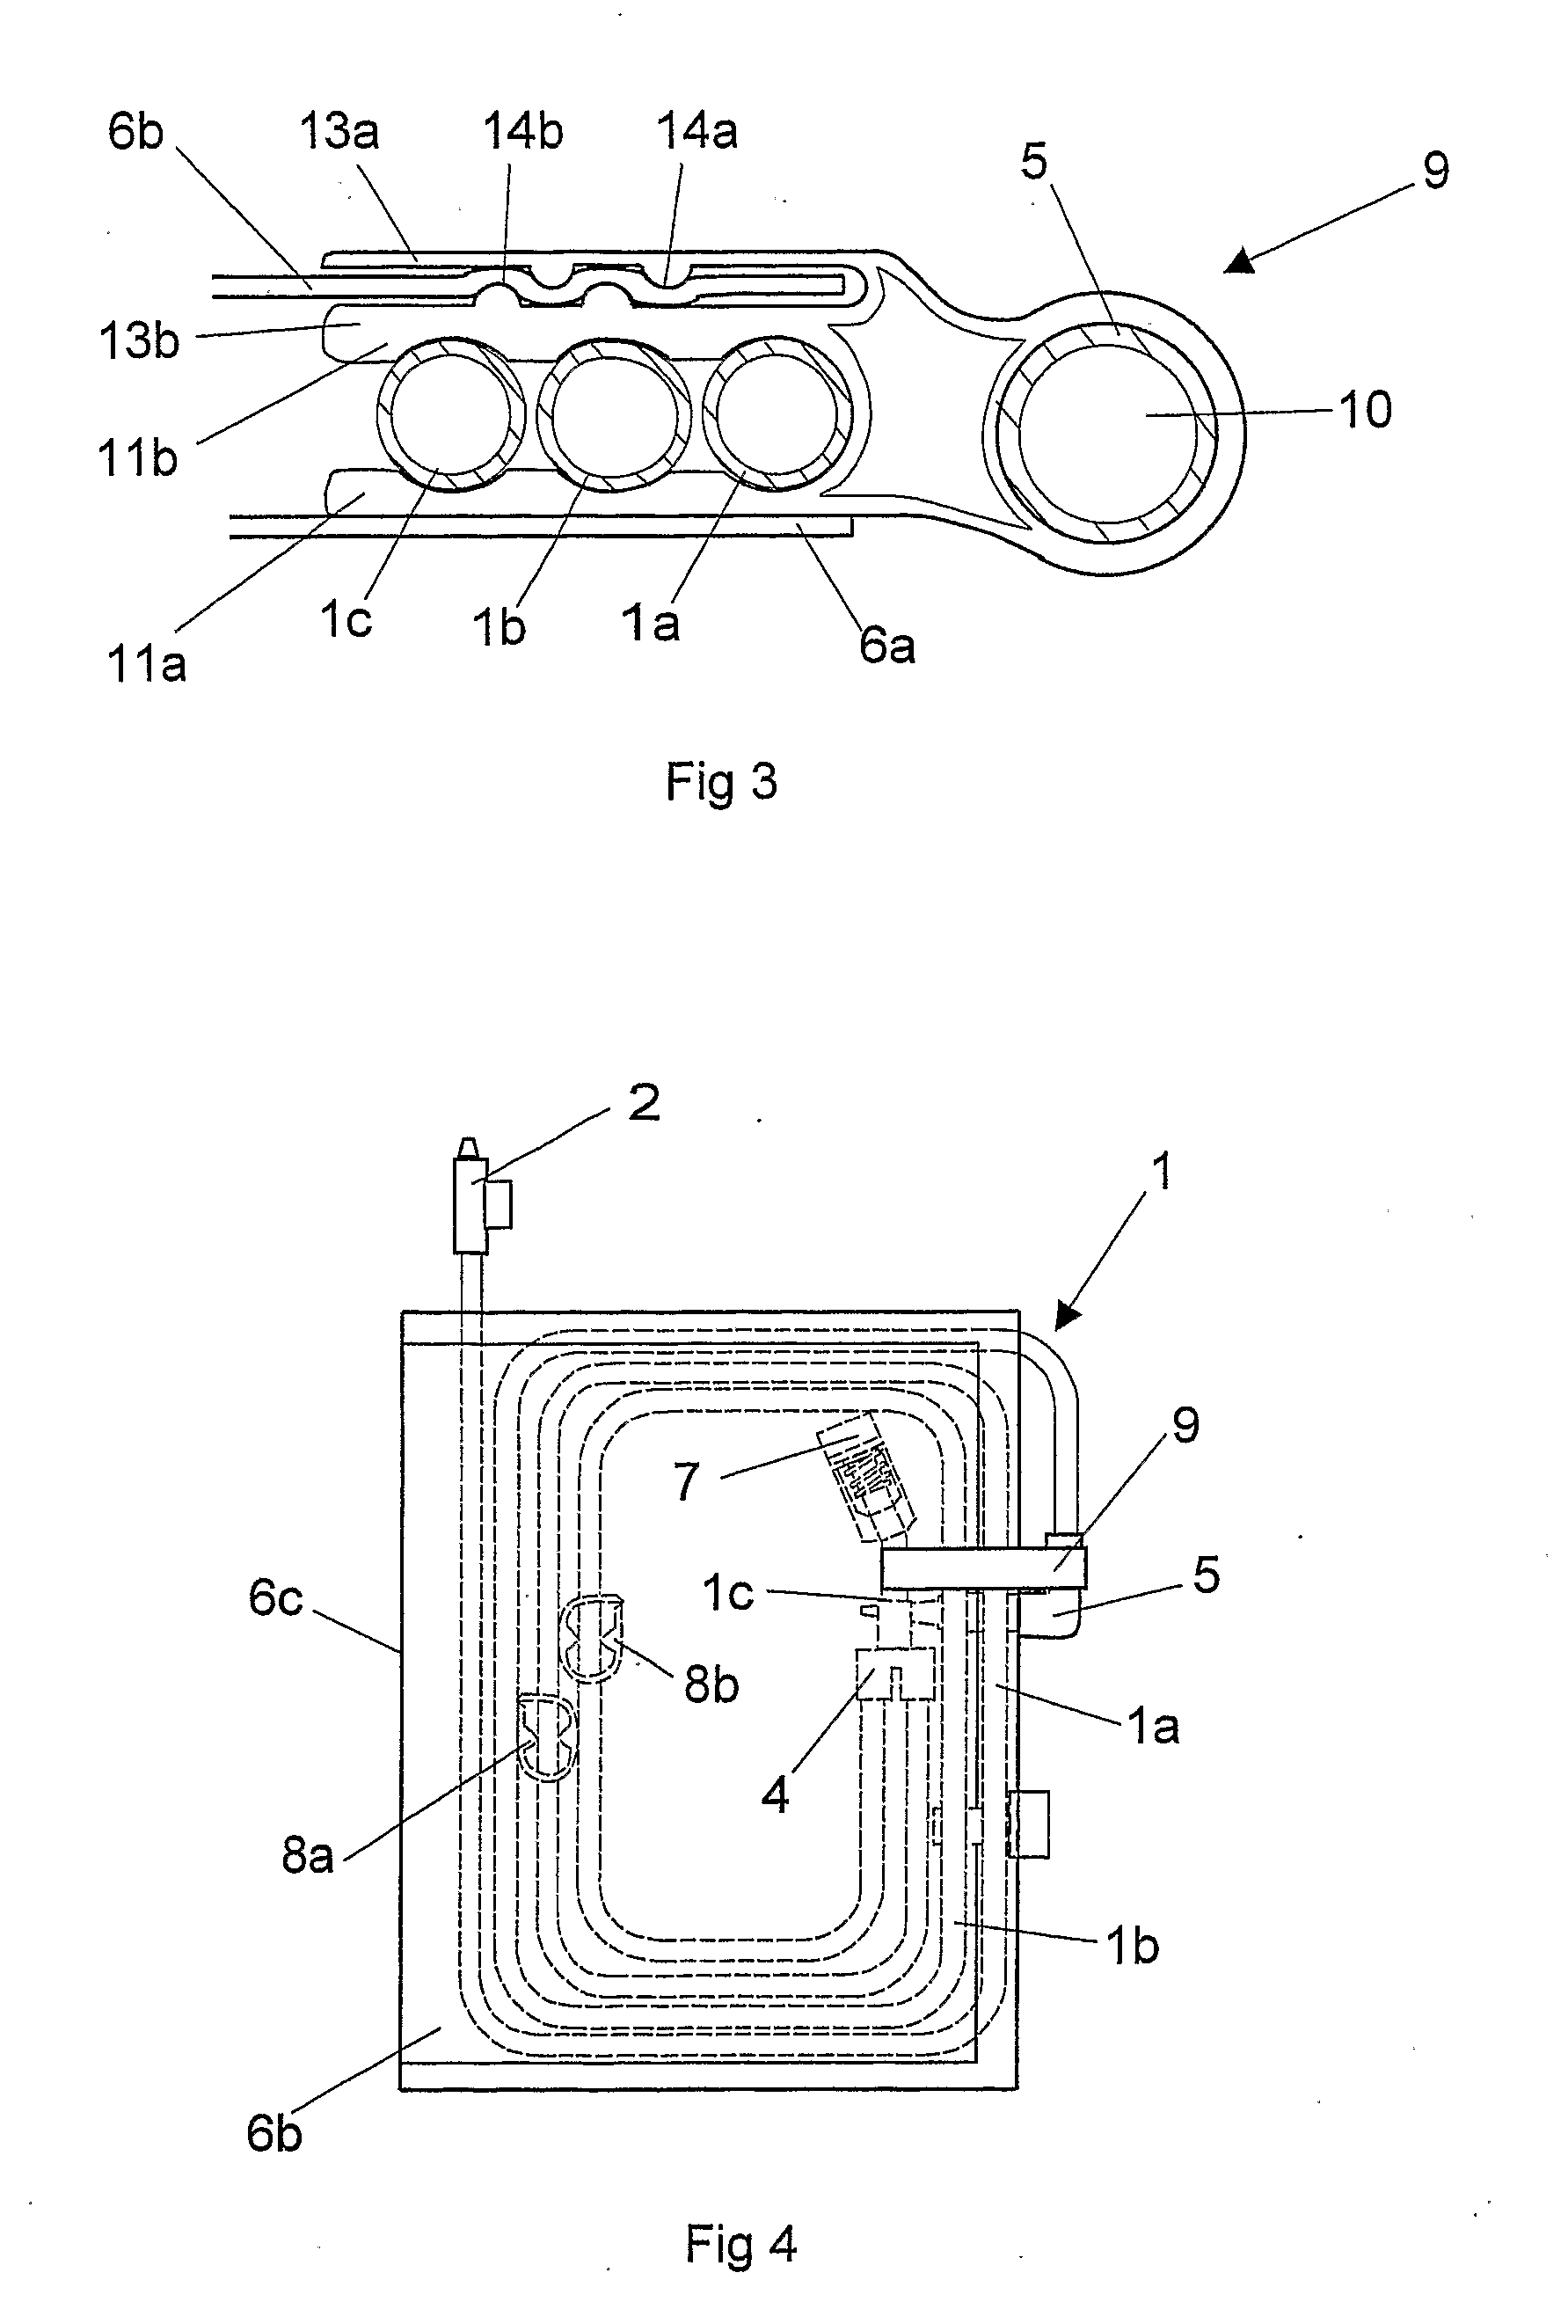 Package for use in a peritoneal dialysis treatment and a method for manufacturing of such a package